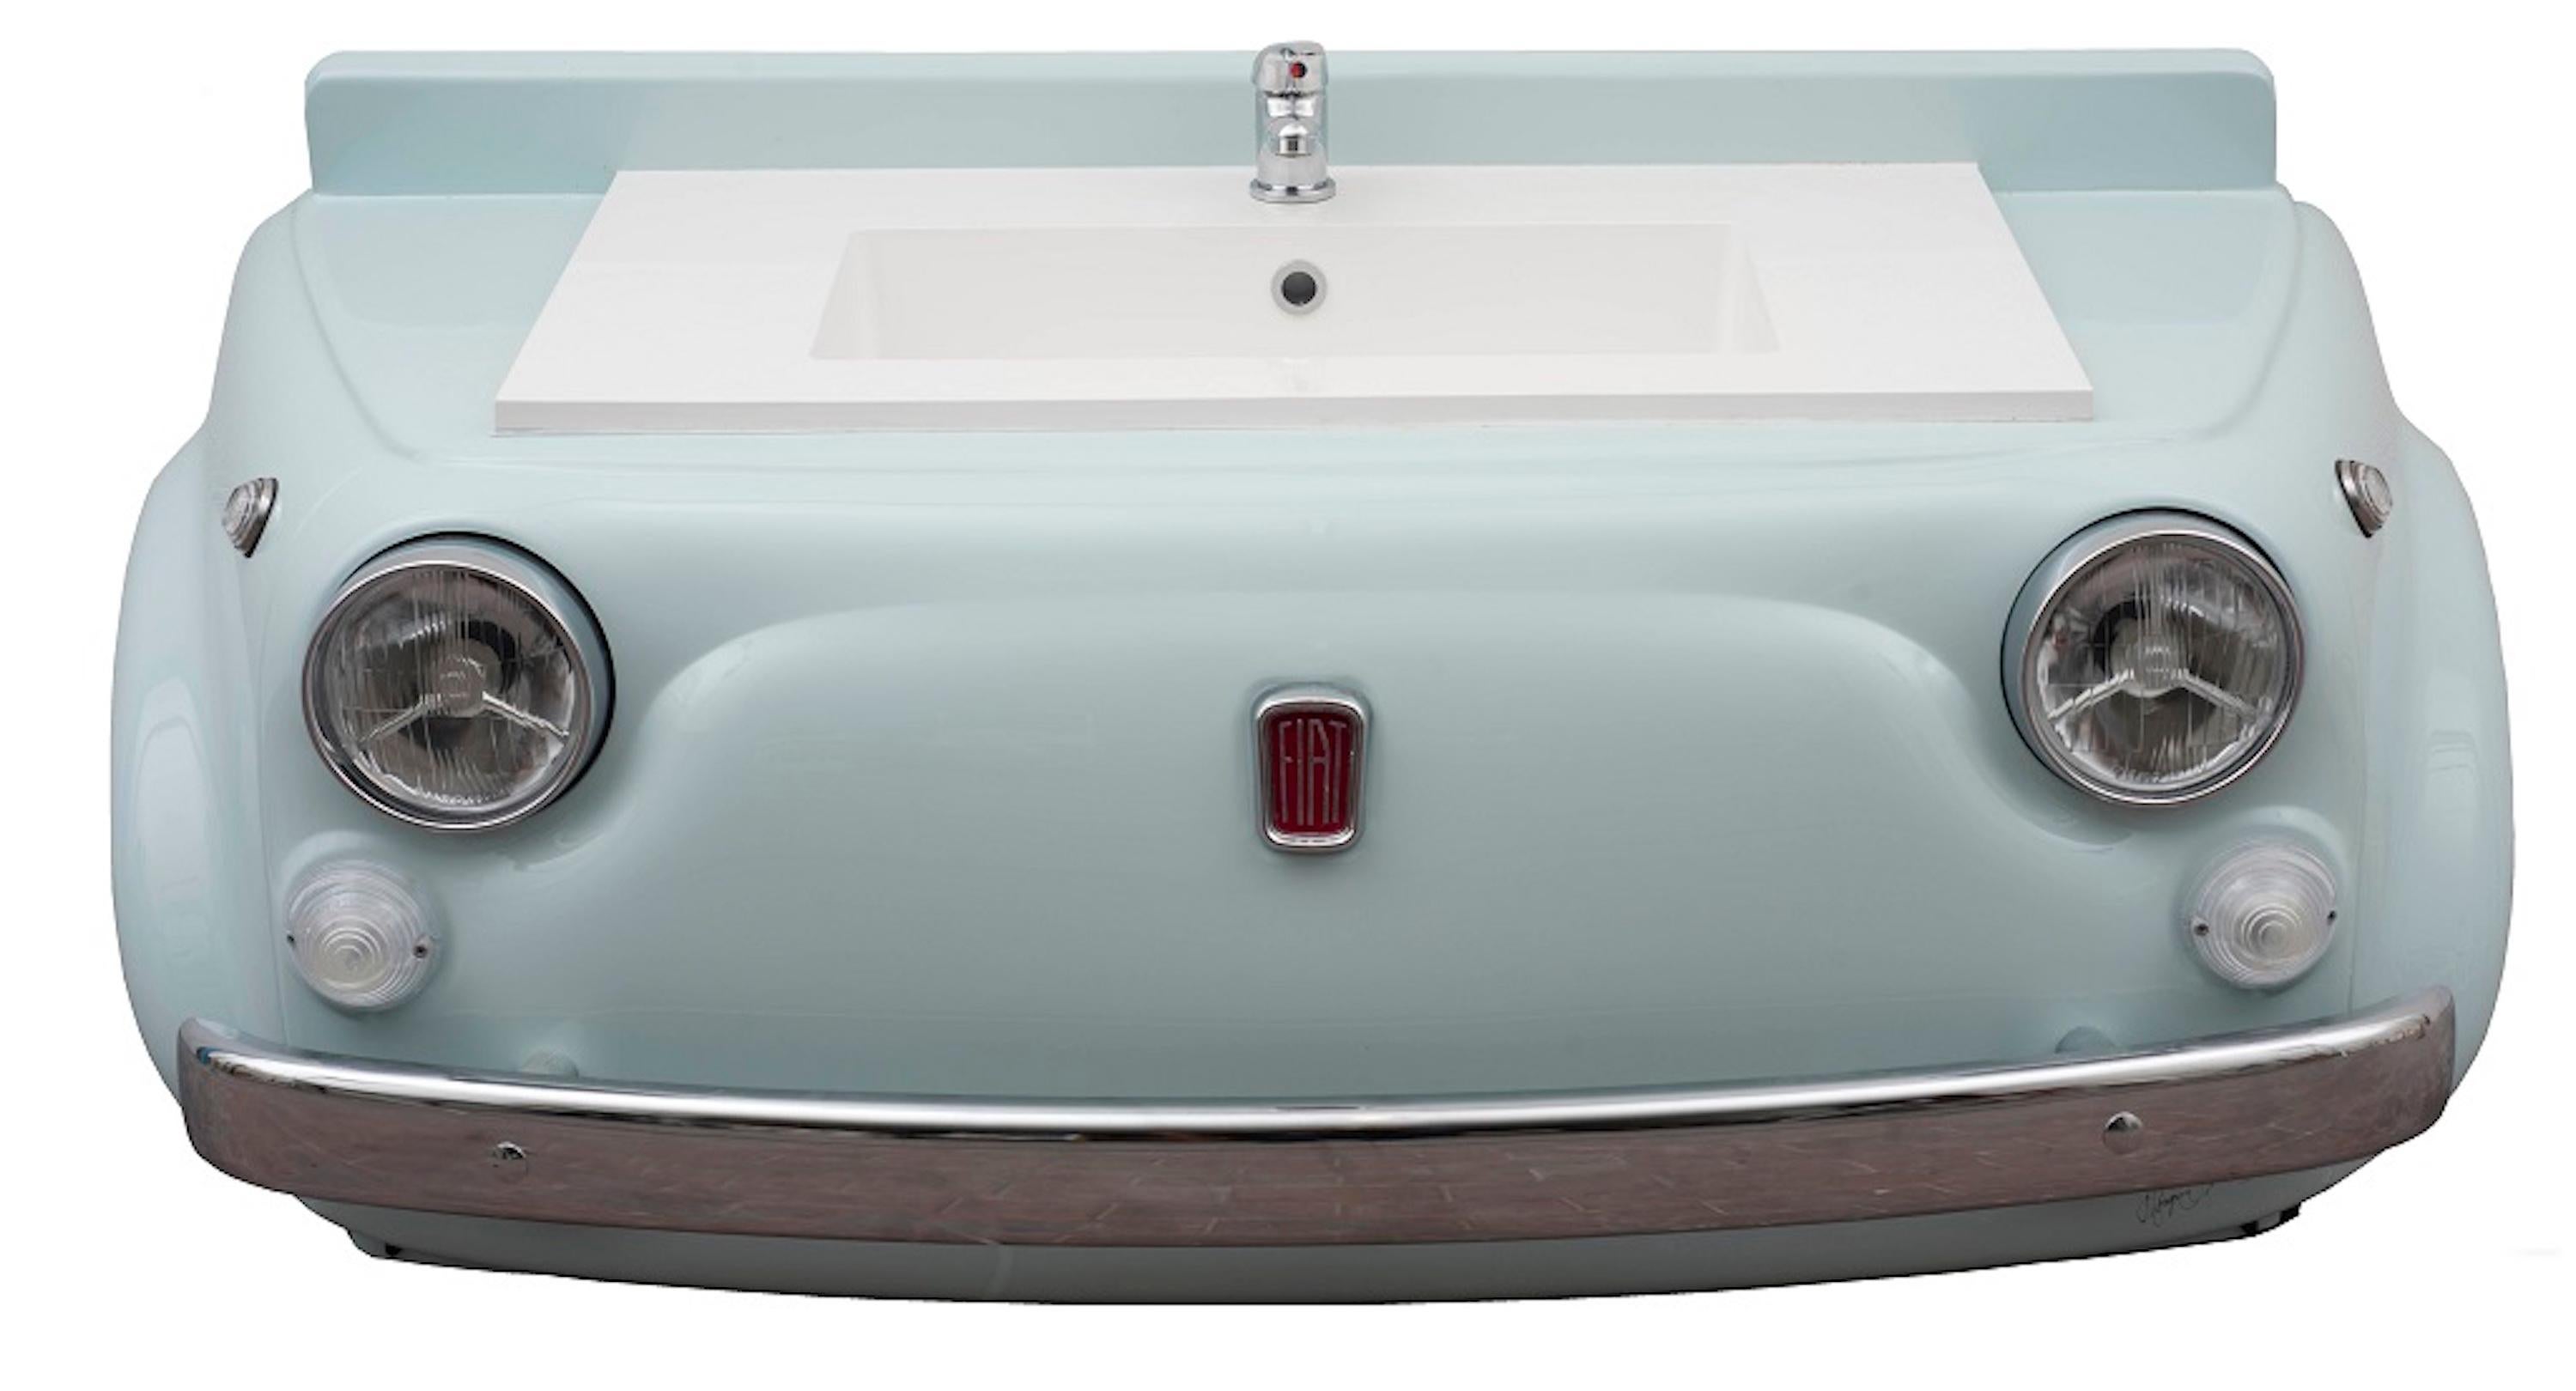 Sink model Michelle 01 is an original design artwork realized by Michele Di Gregorio in 2019.

This unique work was realized with a grille of a vintage car Fiat 500, modified with a hand-wrought ten-tenths metal sheet. The piece comes with a